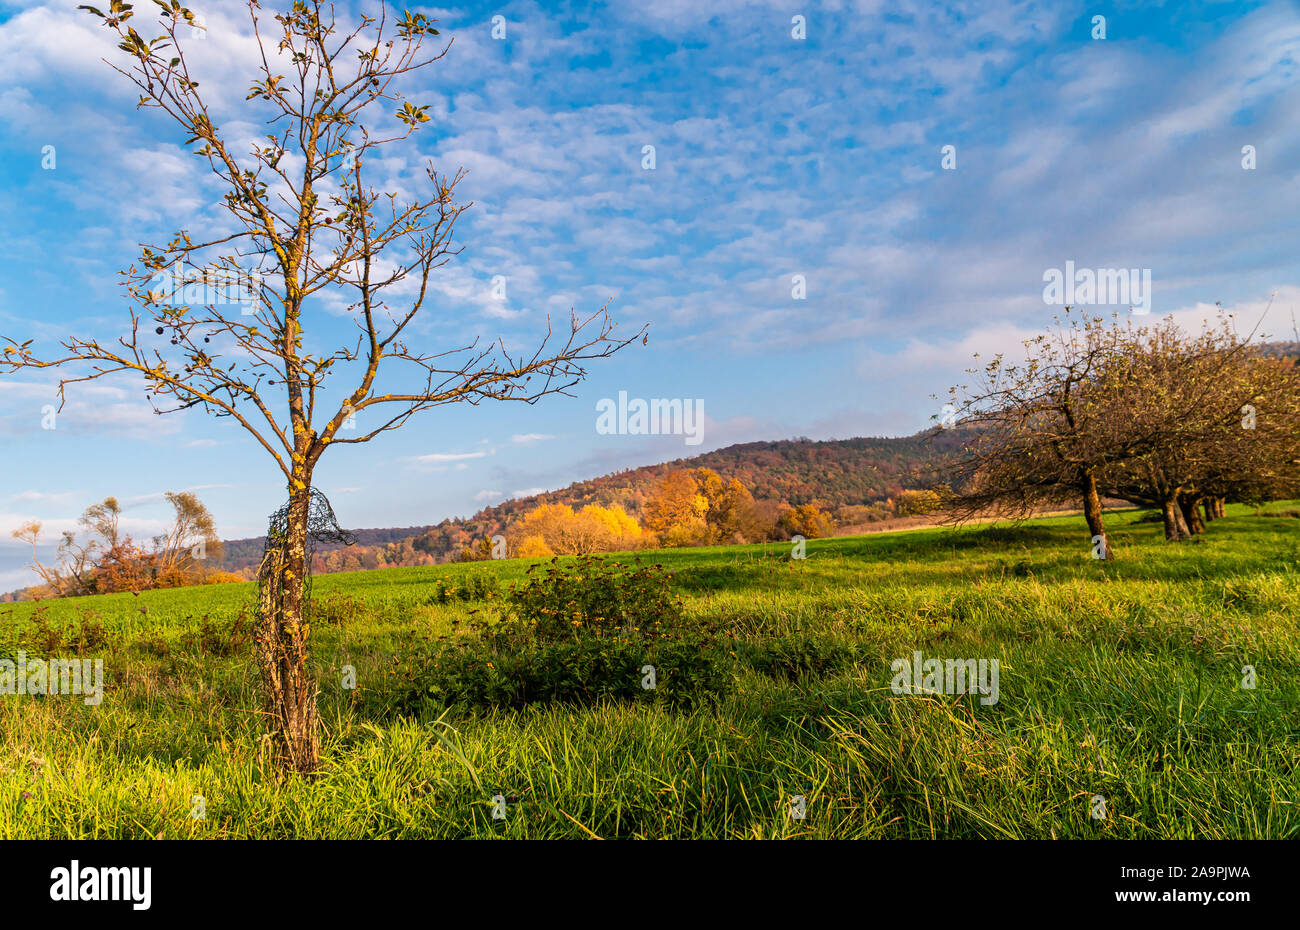 Alone growing tree. Clear weather. Rural area. Stock Photo